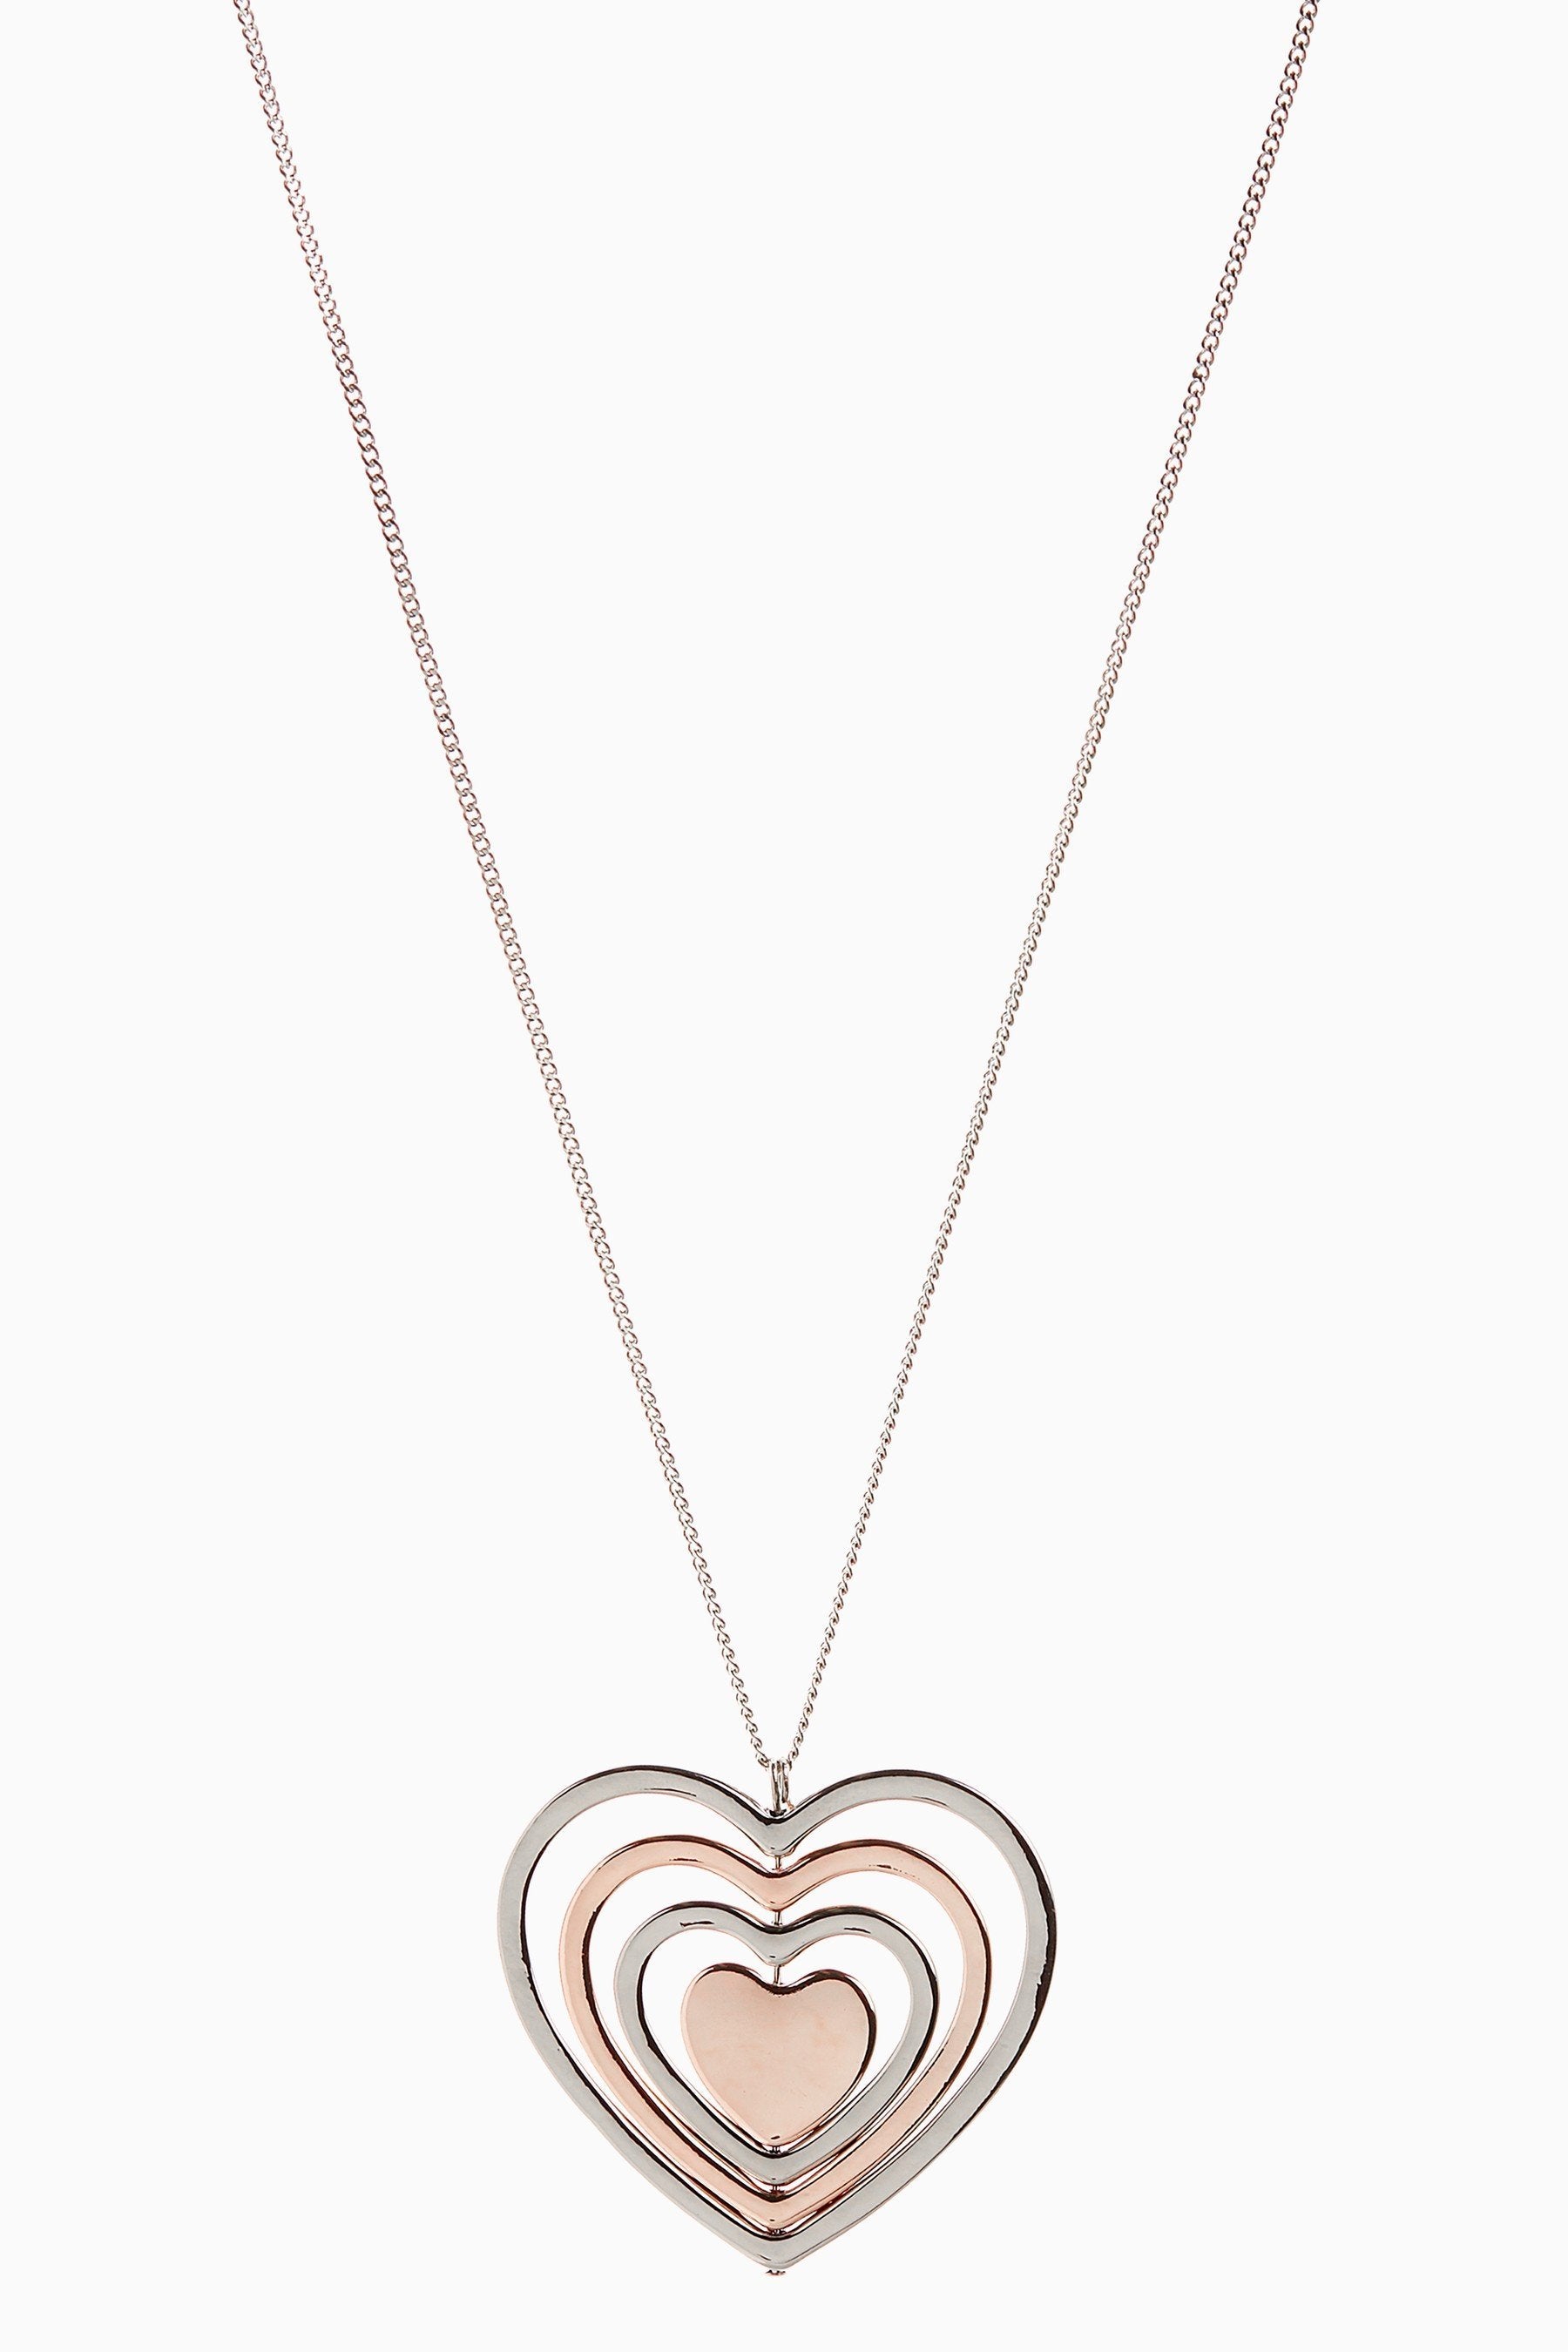 Gold_Silver_Rose Gold Tone Heart Pendant Necklace